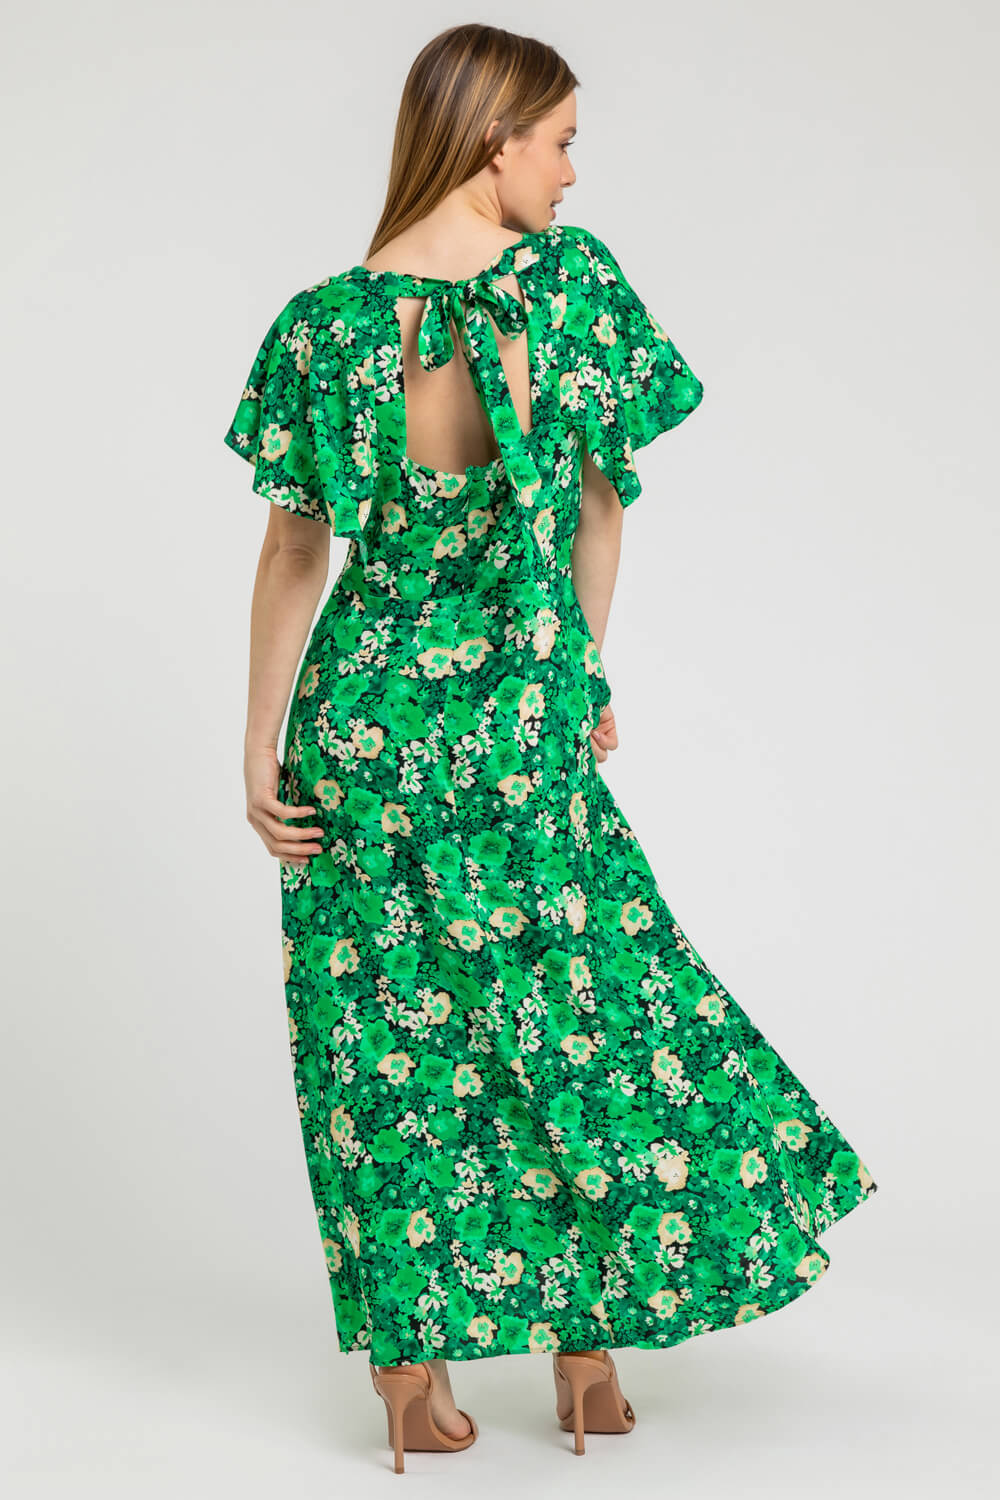 Green Petite Ditsy Floral Print Maxi Dress, Image 2 of 5